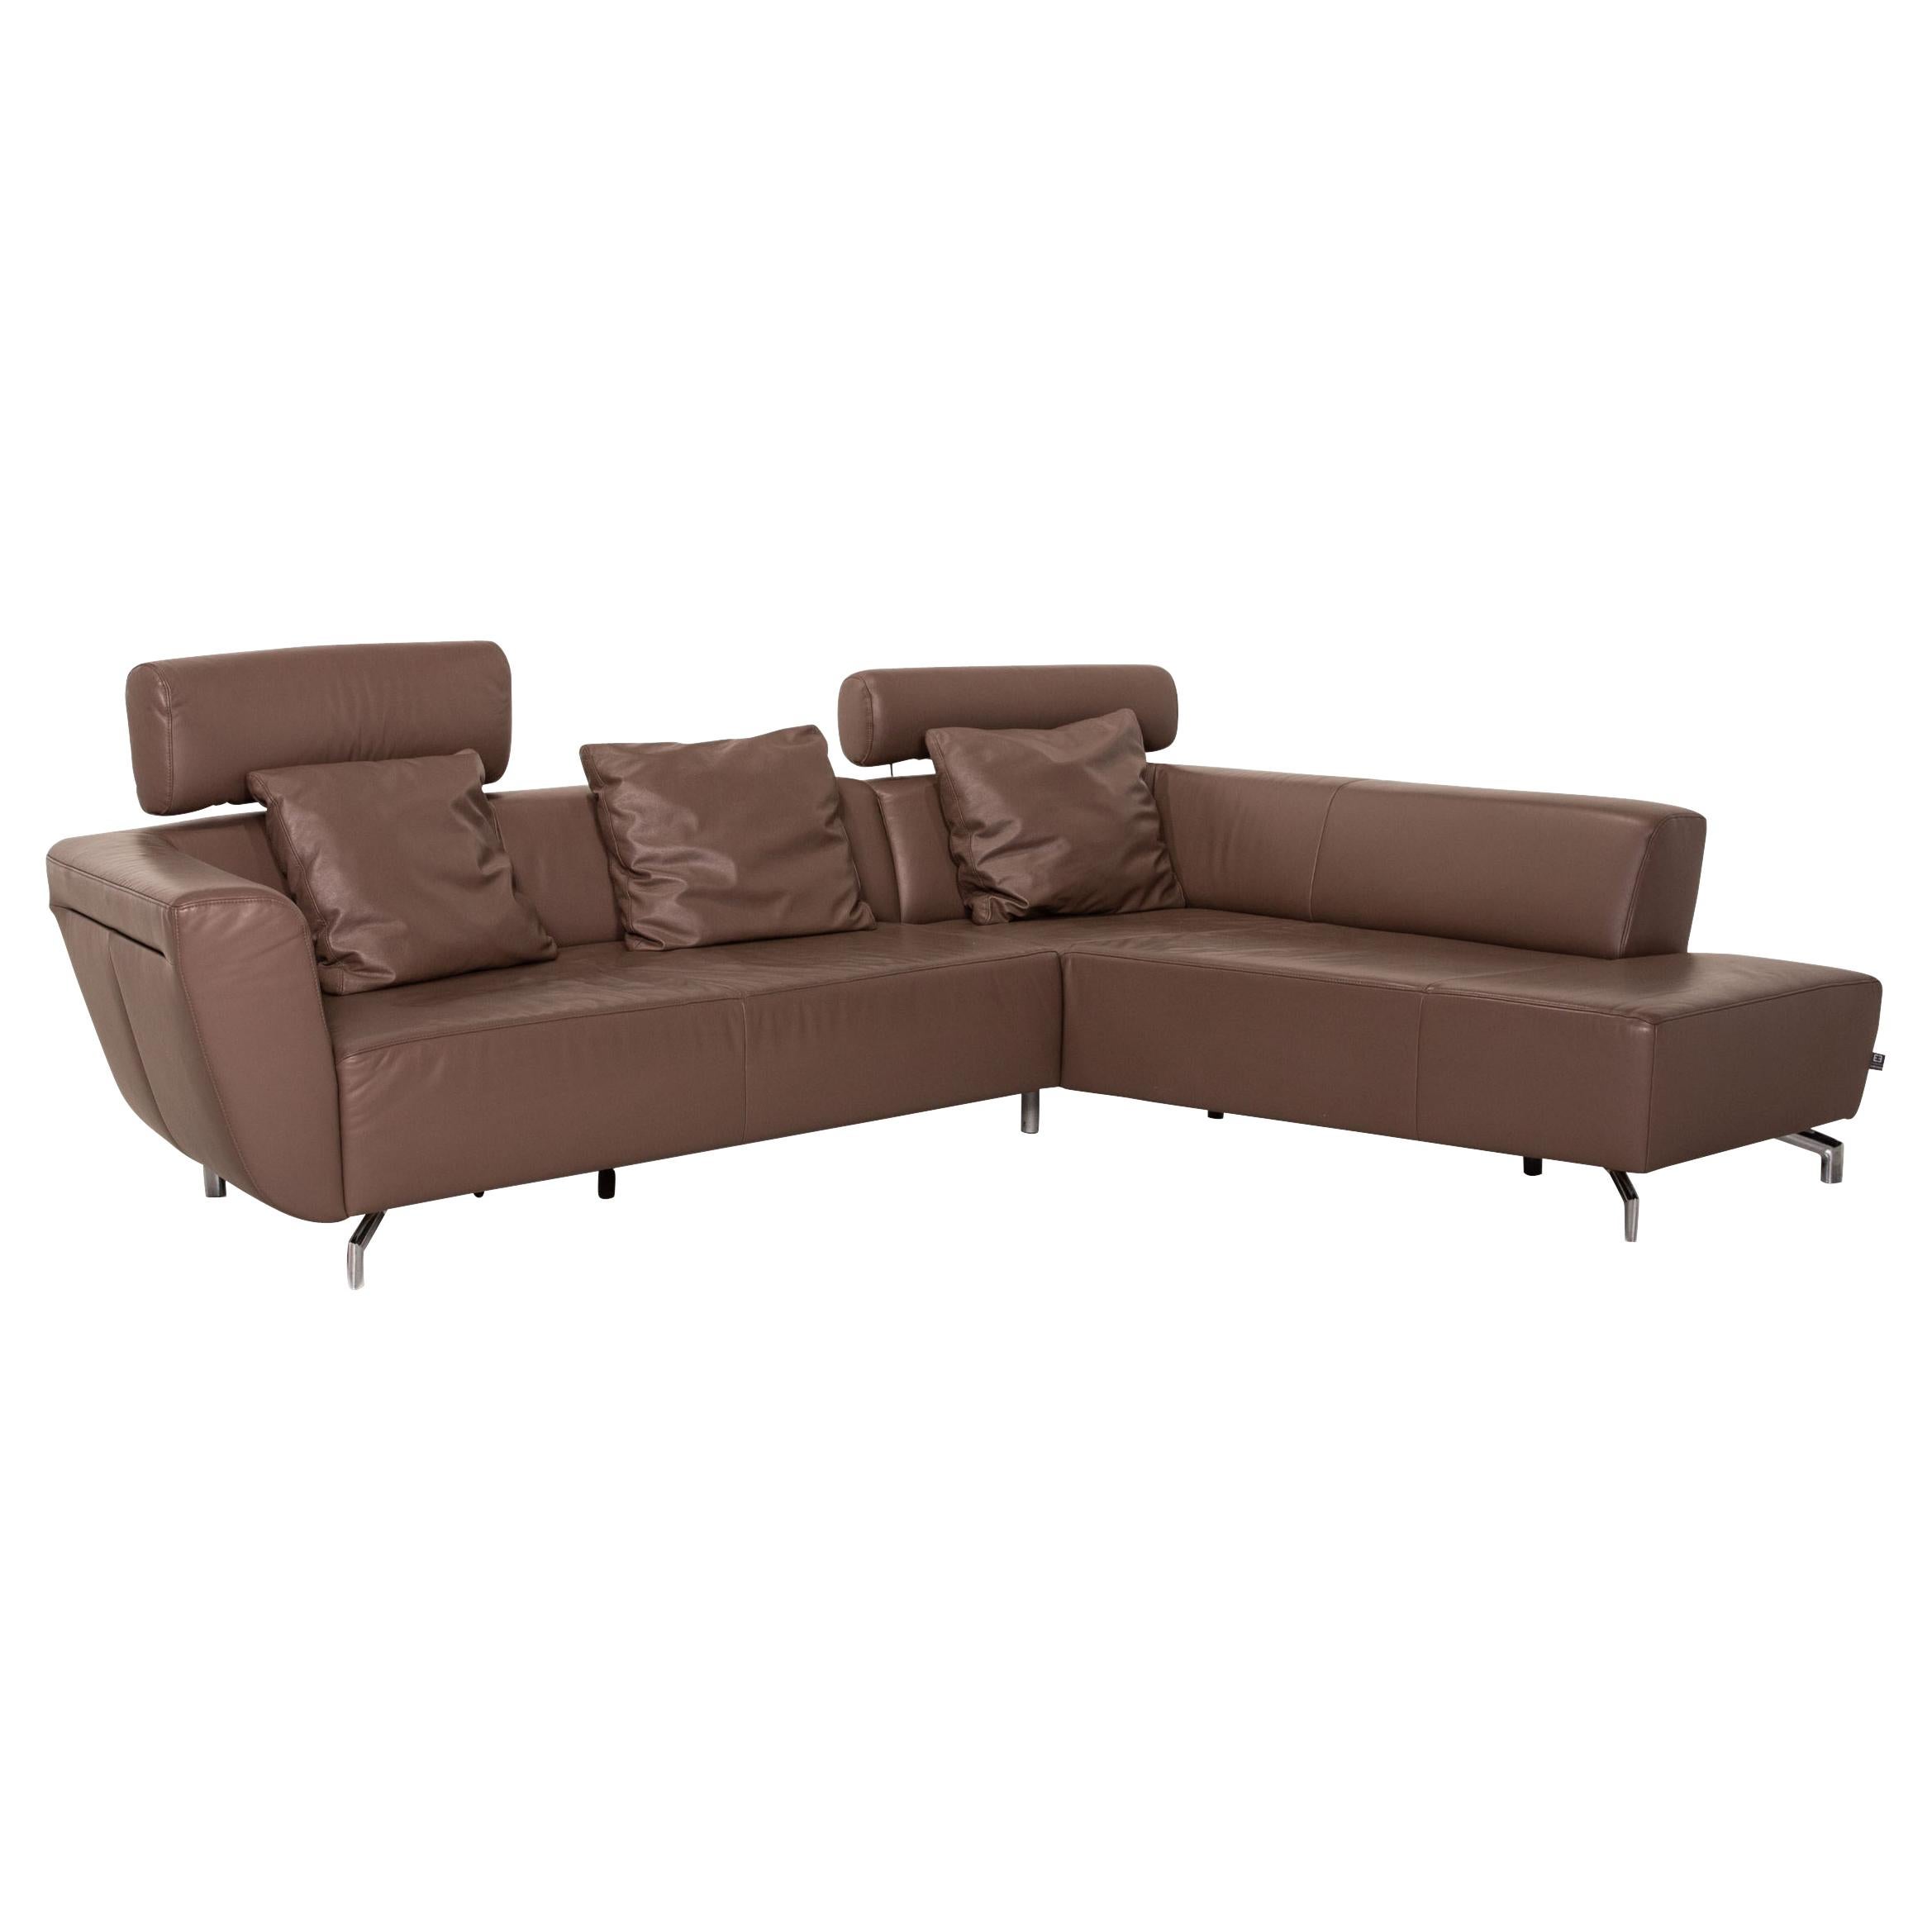 Mondo Leather Corner Sofa Gray Brown Function Sofa Couch For Sale